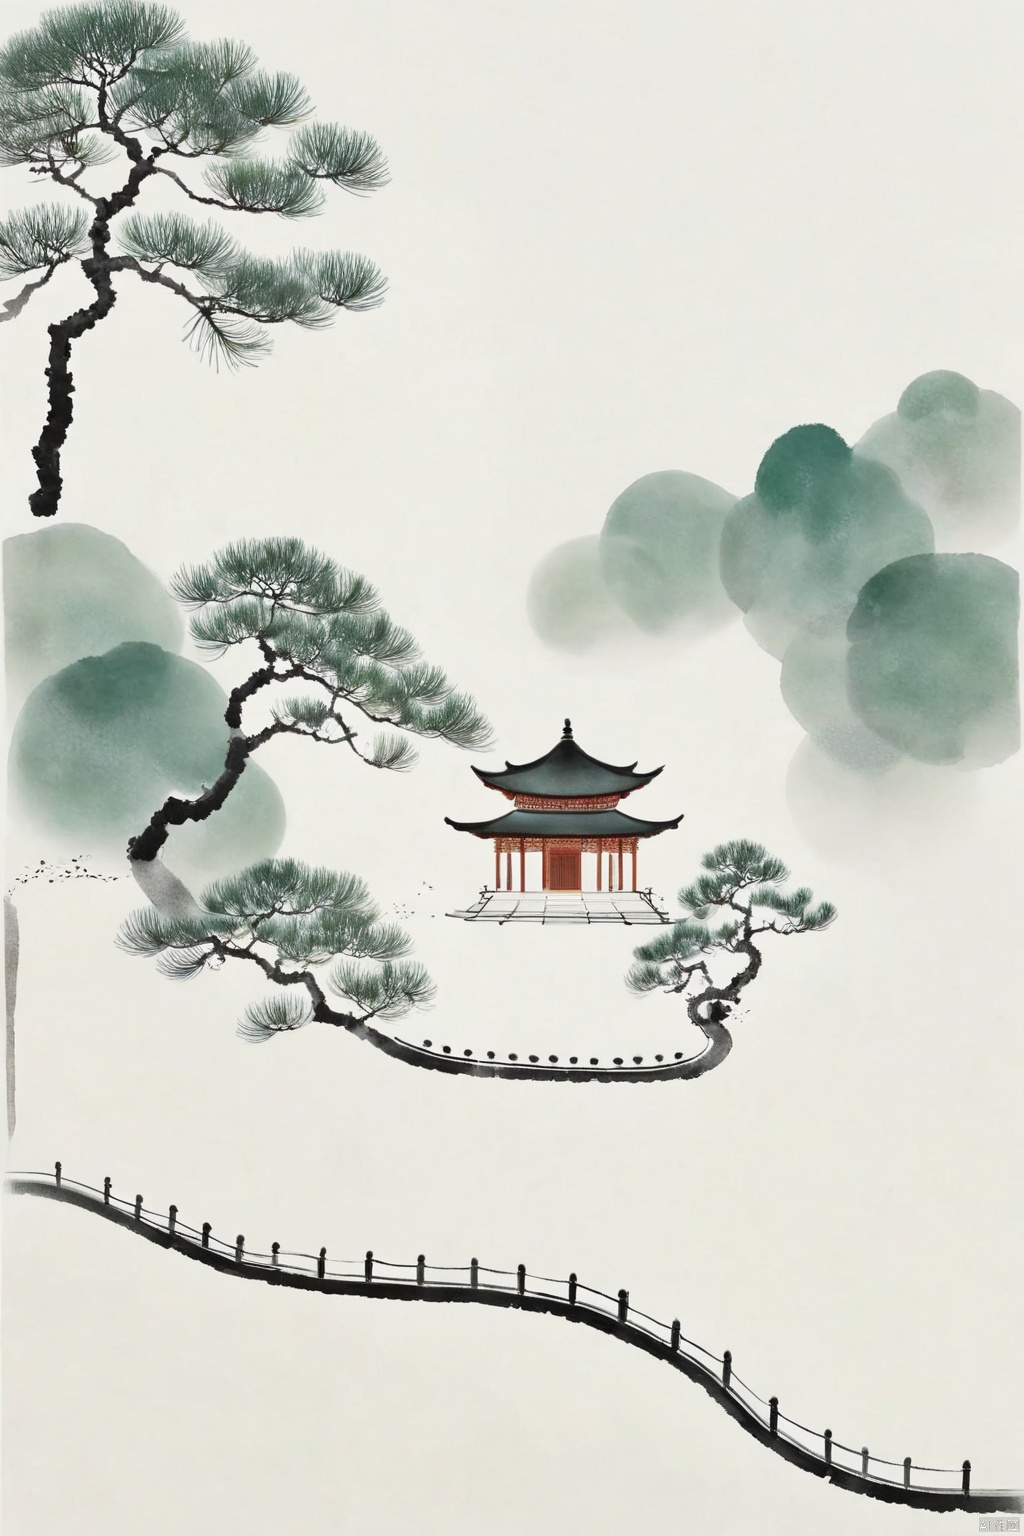 Ancient pavilions, paths, pine trees, large areas of white space, clean background, minimalism